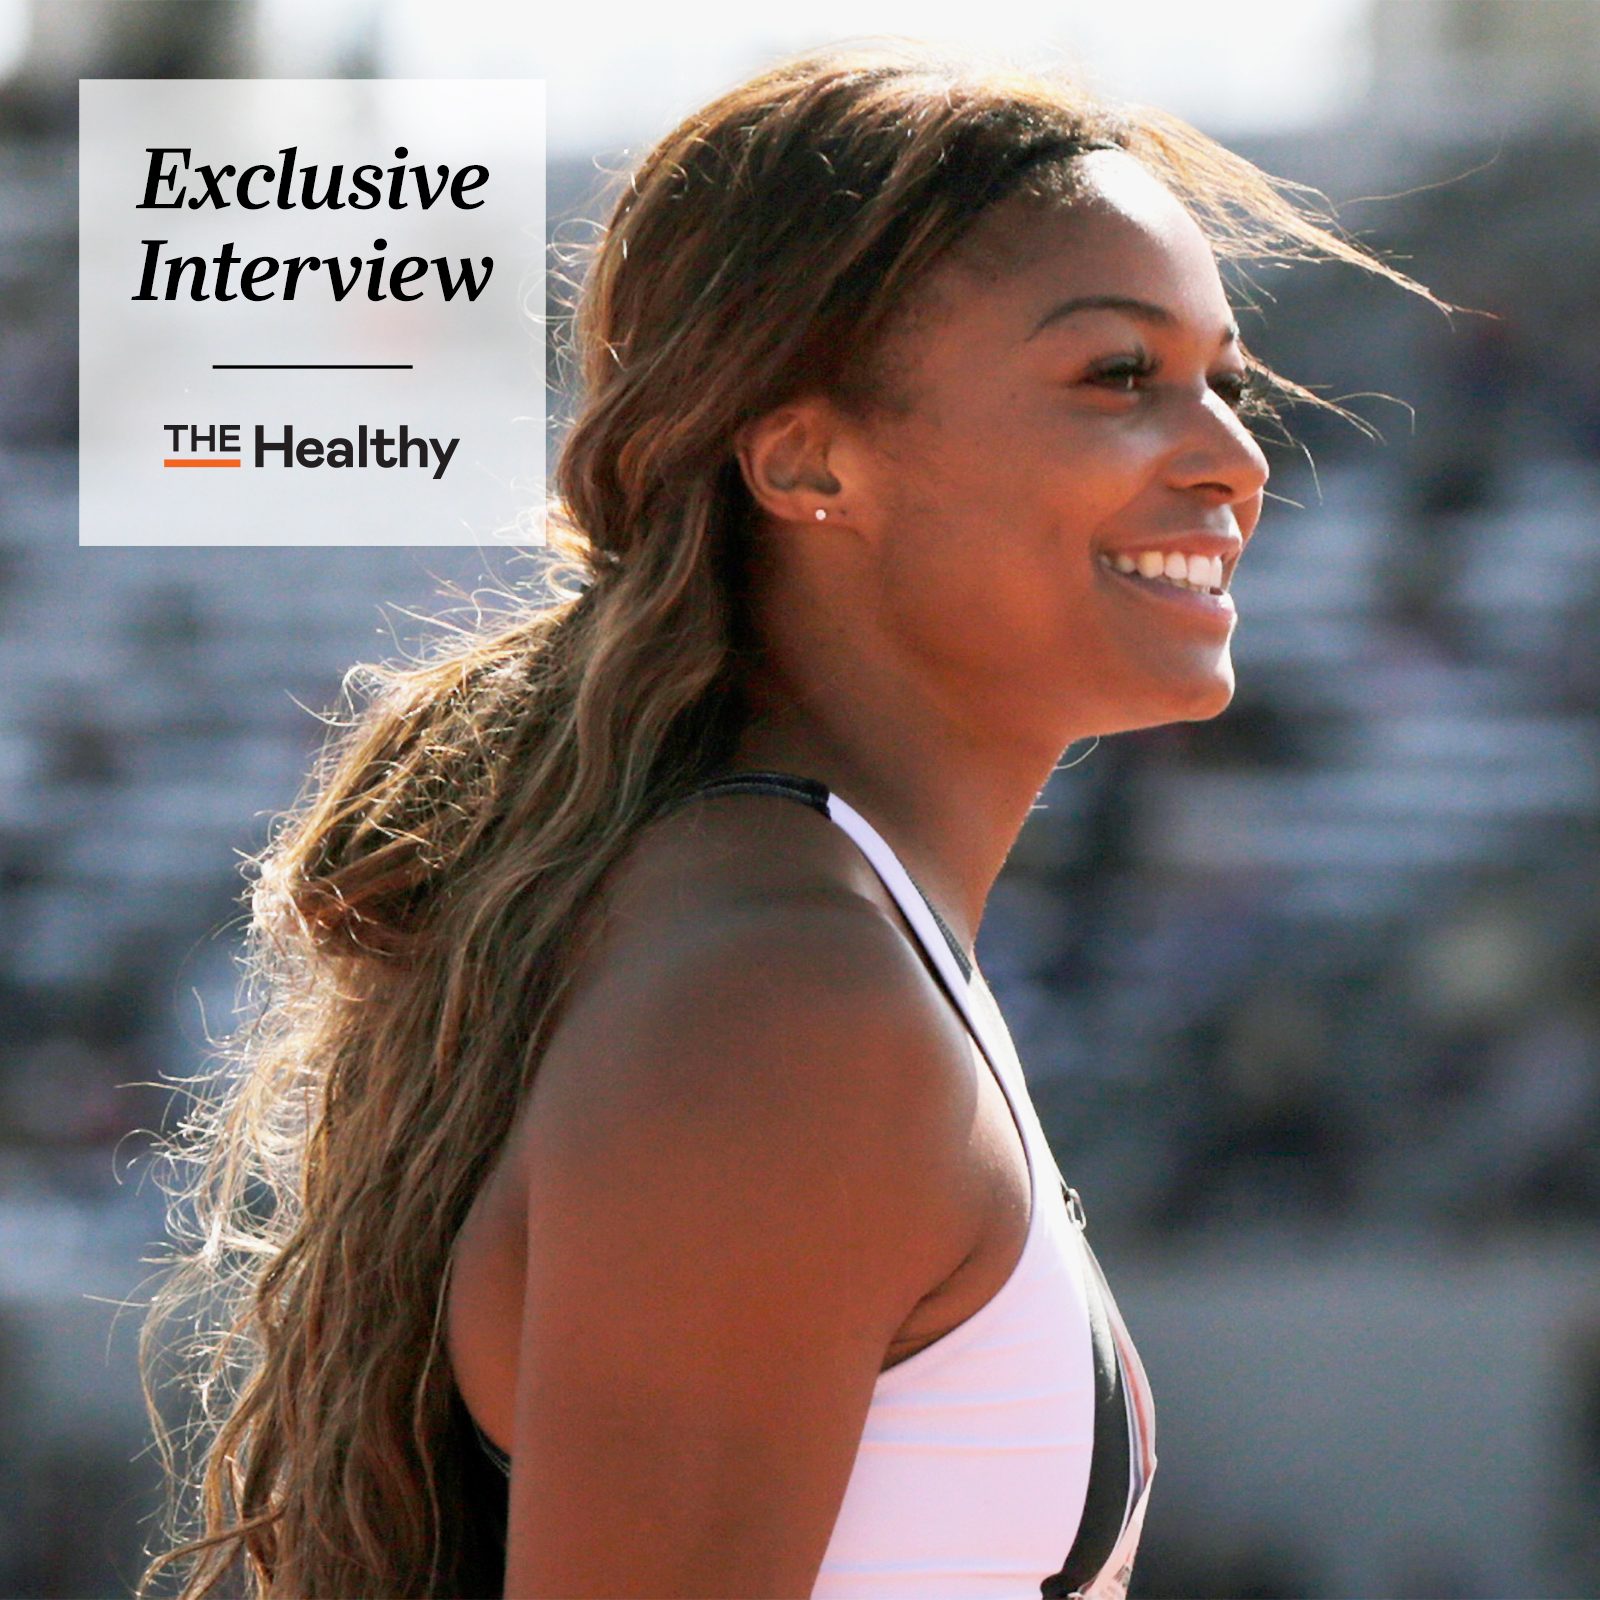 https://www.thehealthy.com/wp-content/uploads/2023/04/TH-Exclusive-Interview-Gabby-Thomas-GettyImages-1391860737-JVedit2.jpg?fit=700%2C1024